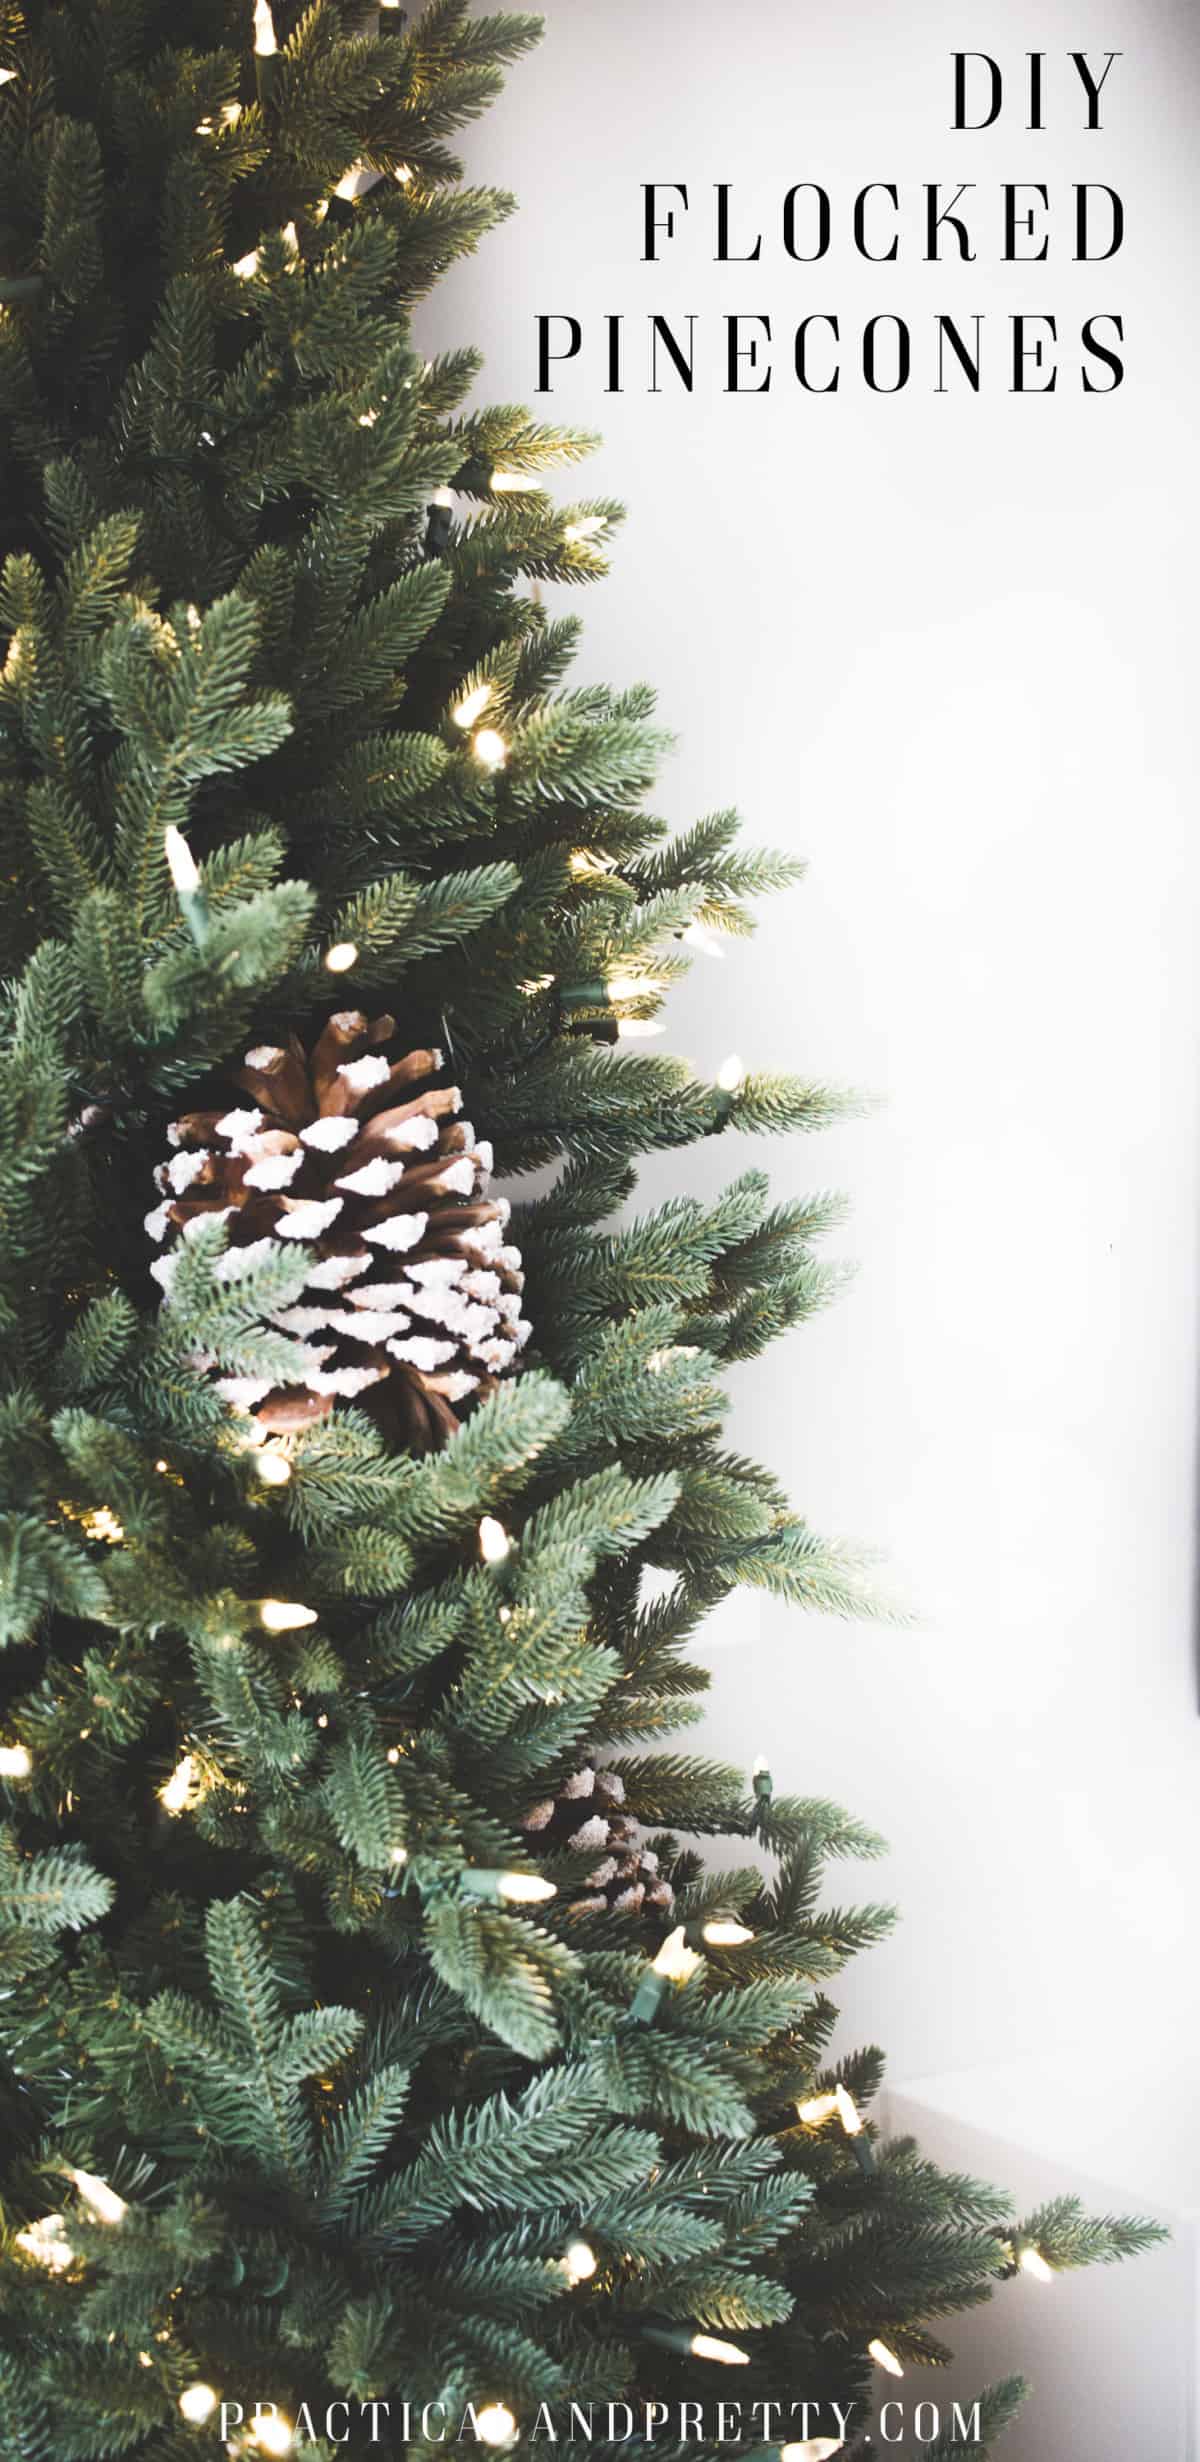 It is so easy to make these pinecones beautiful and sparkly! You'll never belive what I used to get these pinecones to looks like they have snow on their tips.